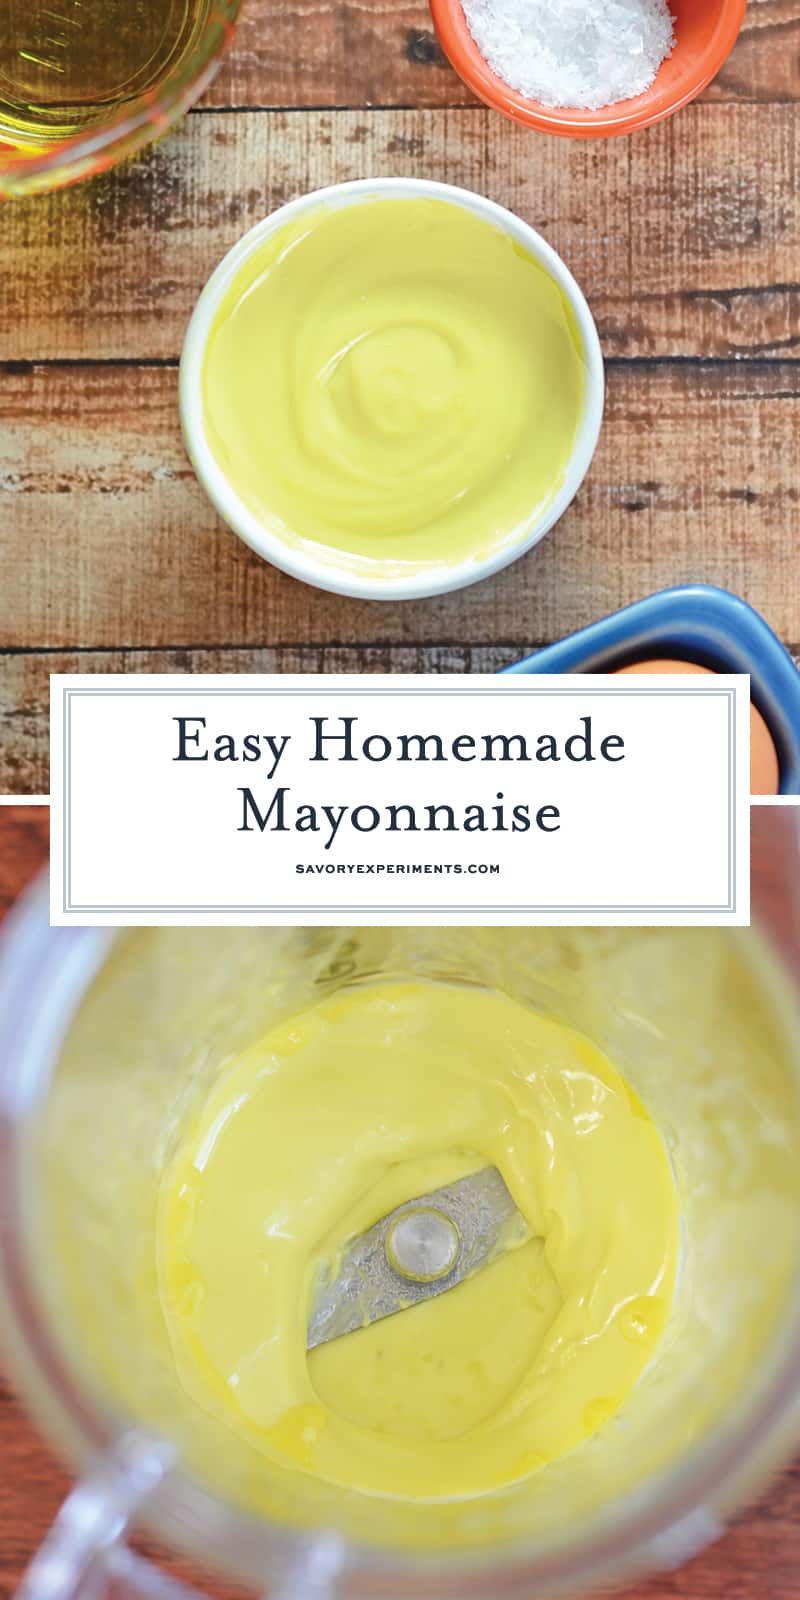 Do you know how easy it is to make homemade mayonnaise? SO EASY! Make my blender mayonnaise with 3 ingredients and 3 minutes today! #homemademayonnaise #blendermayonnause #howtomakemayonnaise www.savoryexperiments.com